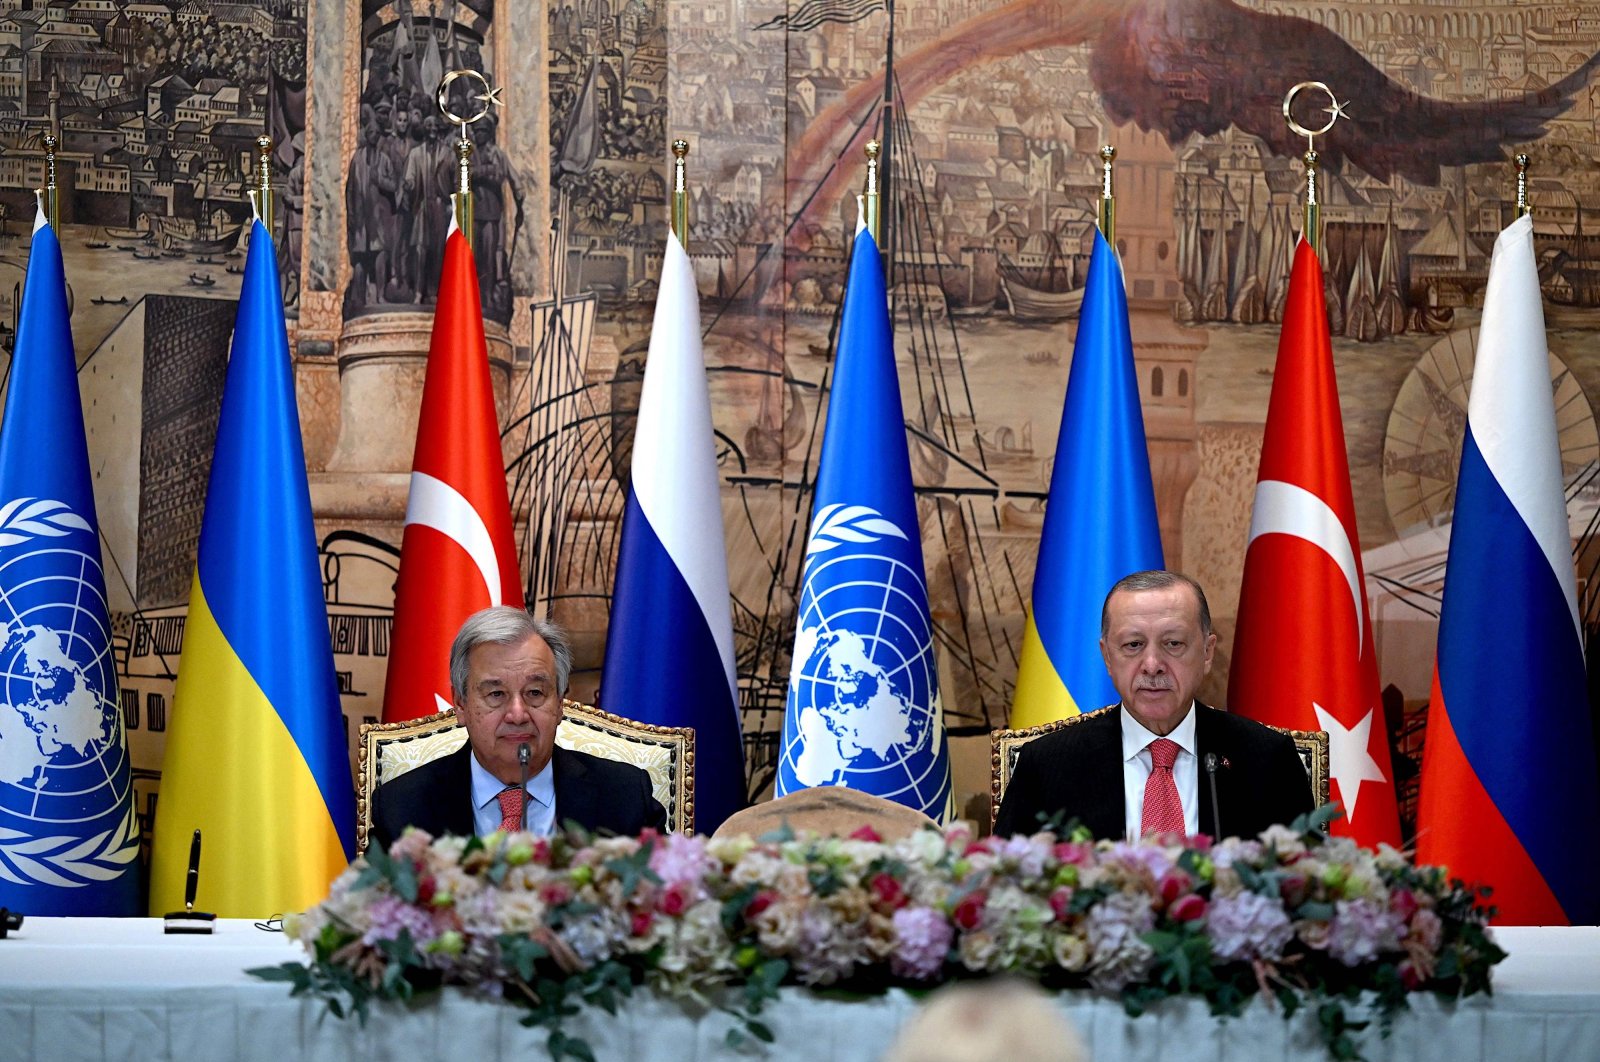 President Recep Tayyip Erdoğan and United Nations (UN) Secretary-General Antonio Guterres sit at the start of the signature ceremony of an initiative on the safe transportation of grain and foodstuffs from Ukrainian ports, in Istanbul, on July 22, 2022. (AFP)